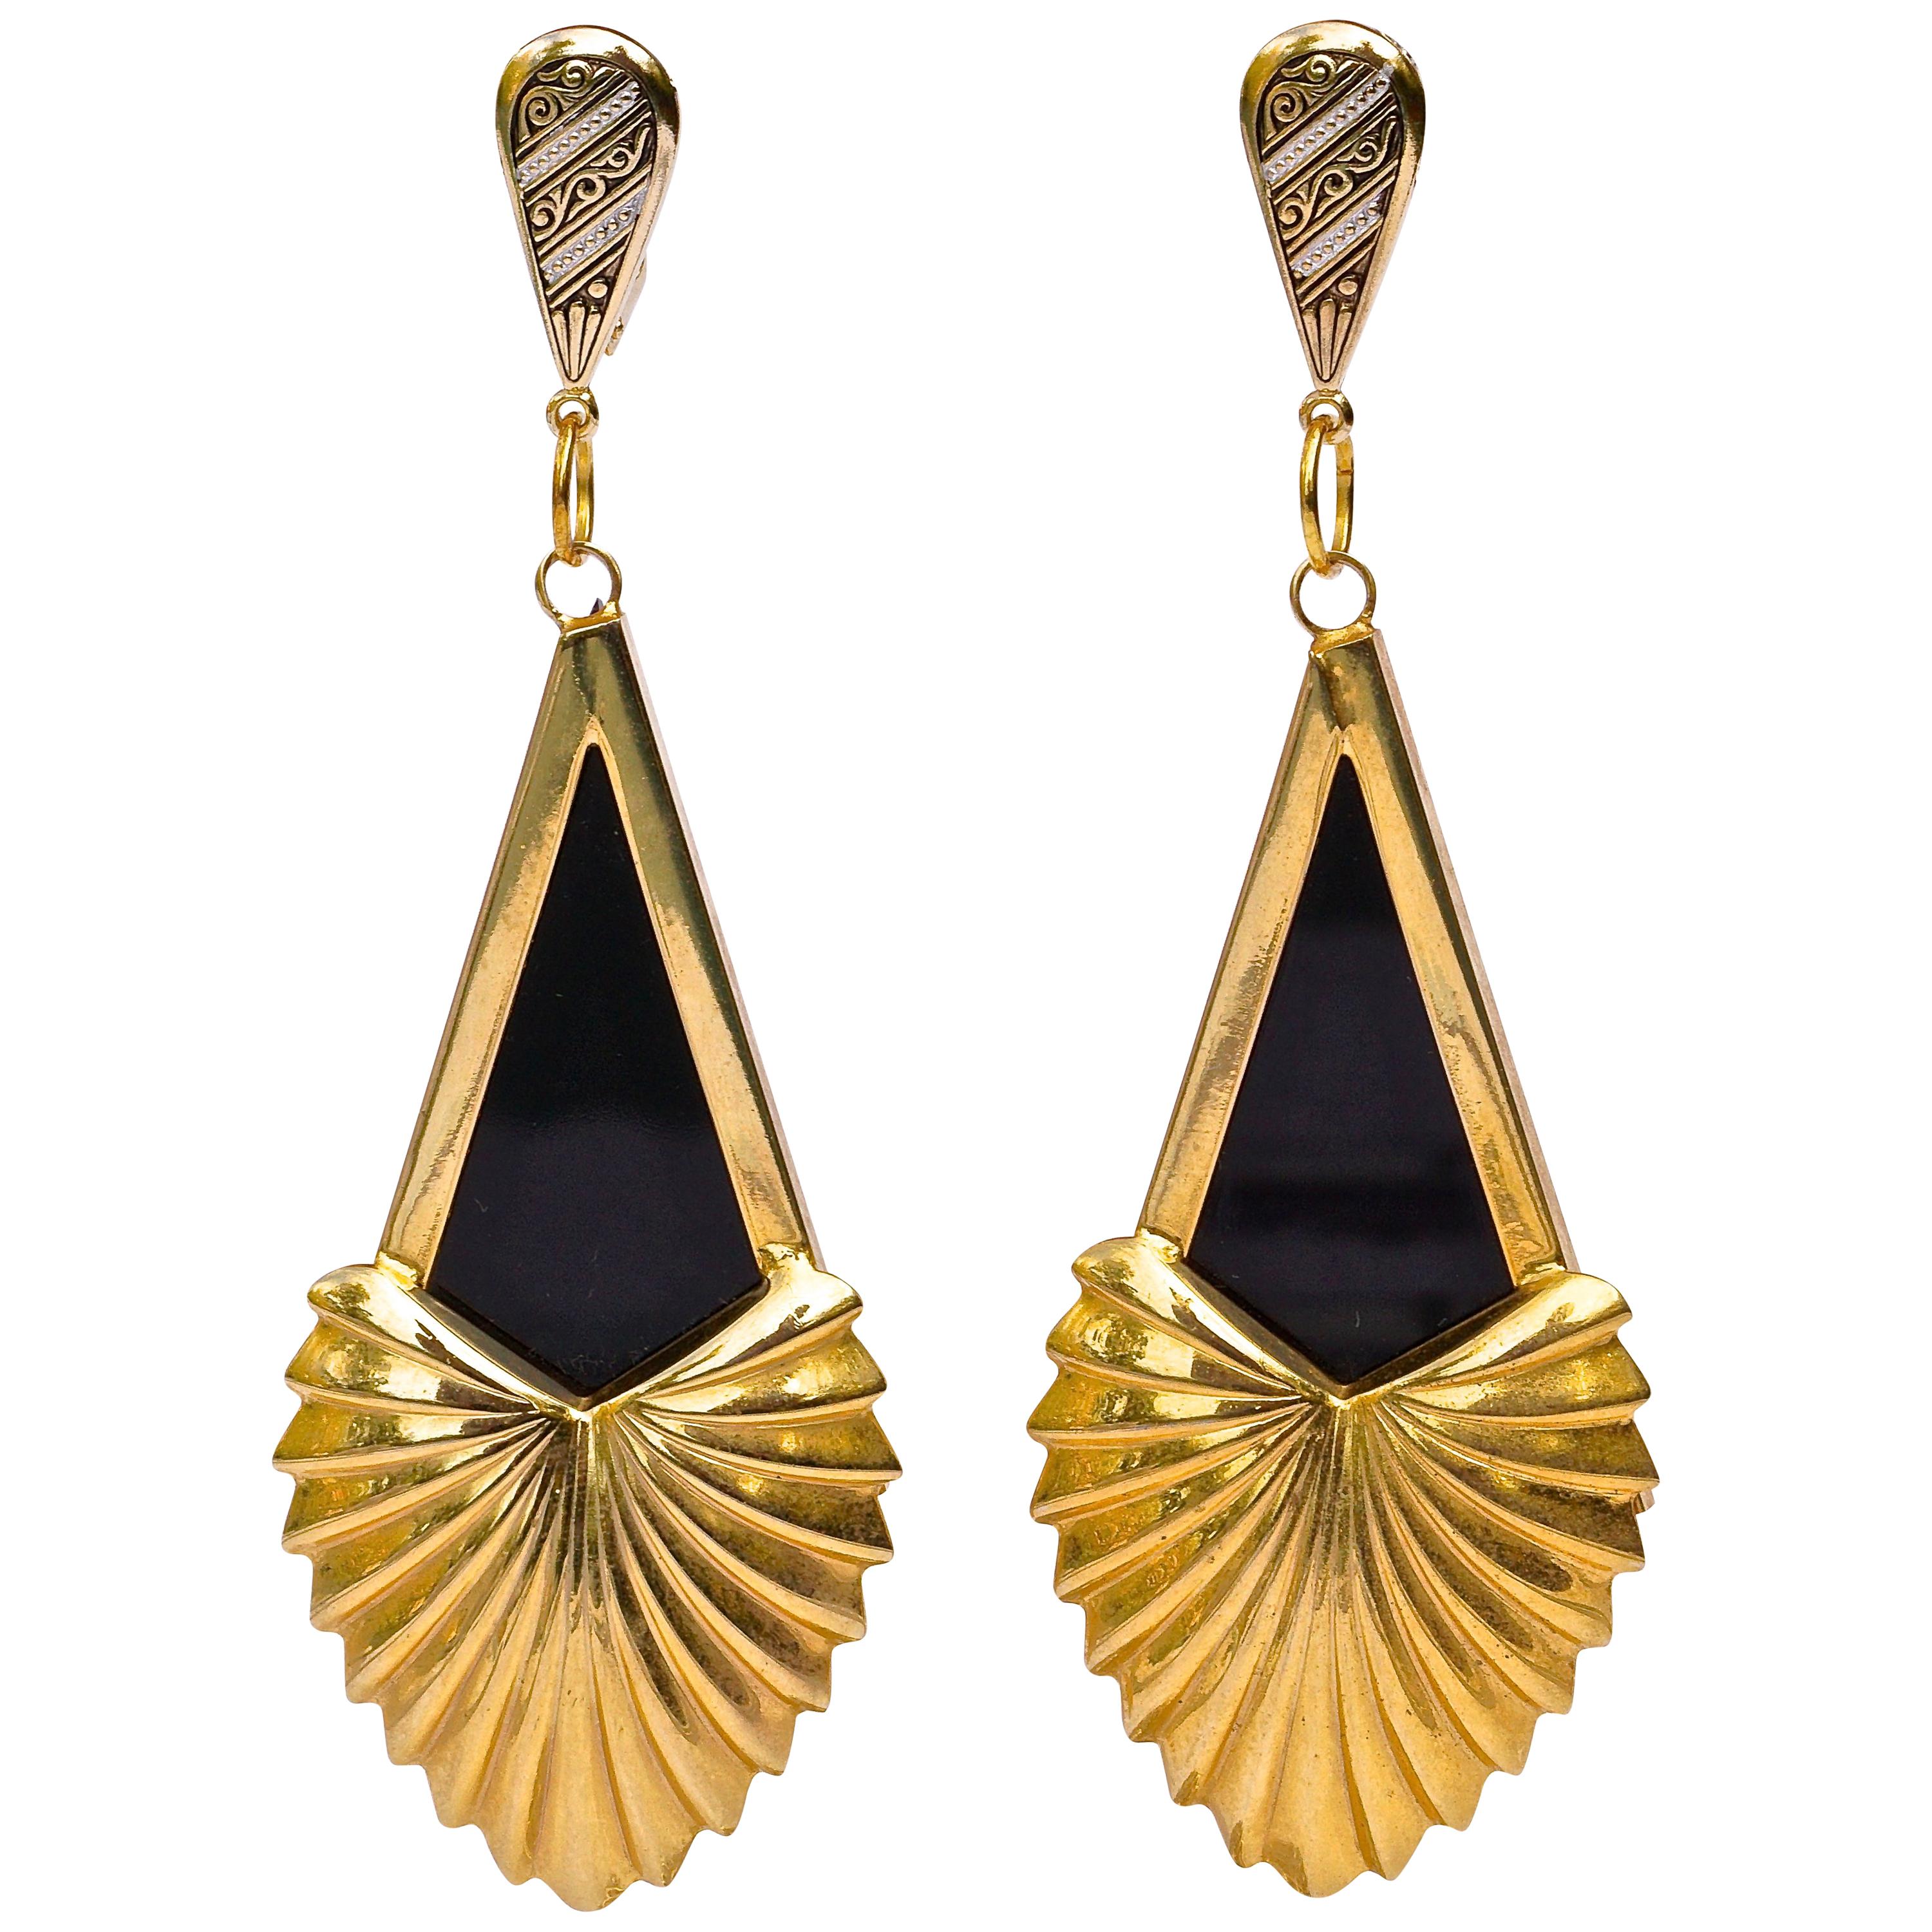 Large Spanish Gold Tone and Black Drop Statement Earrings